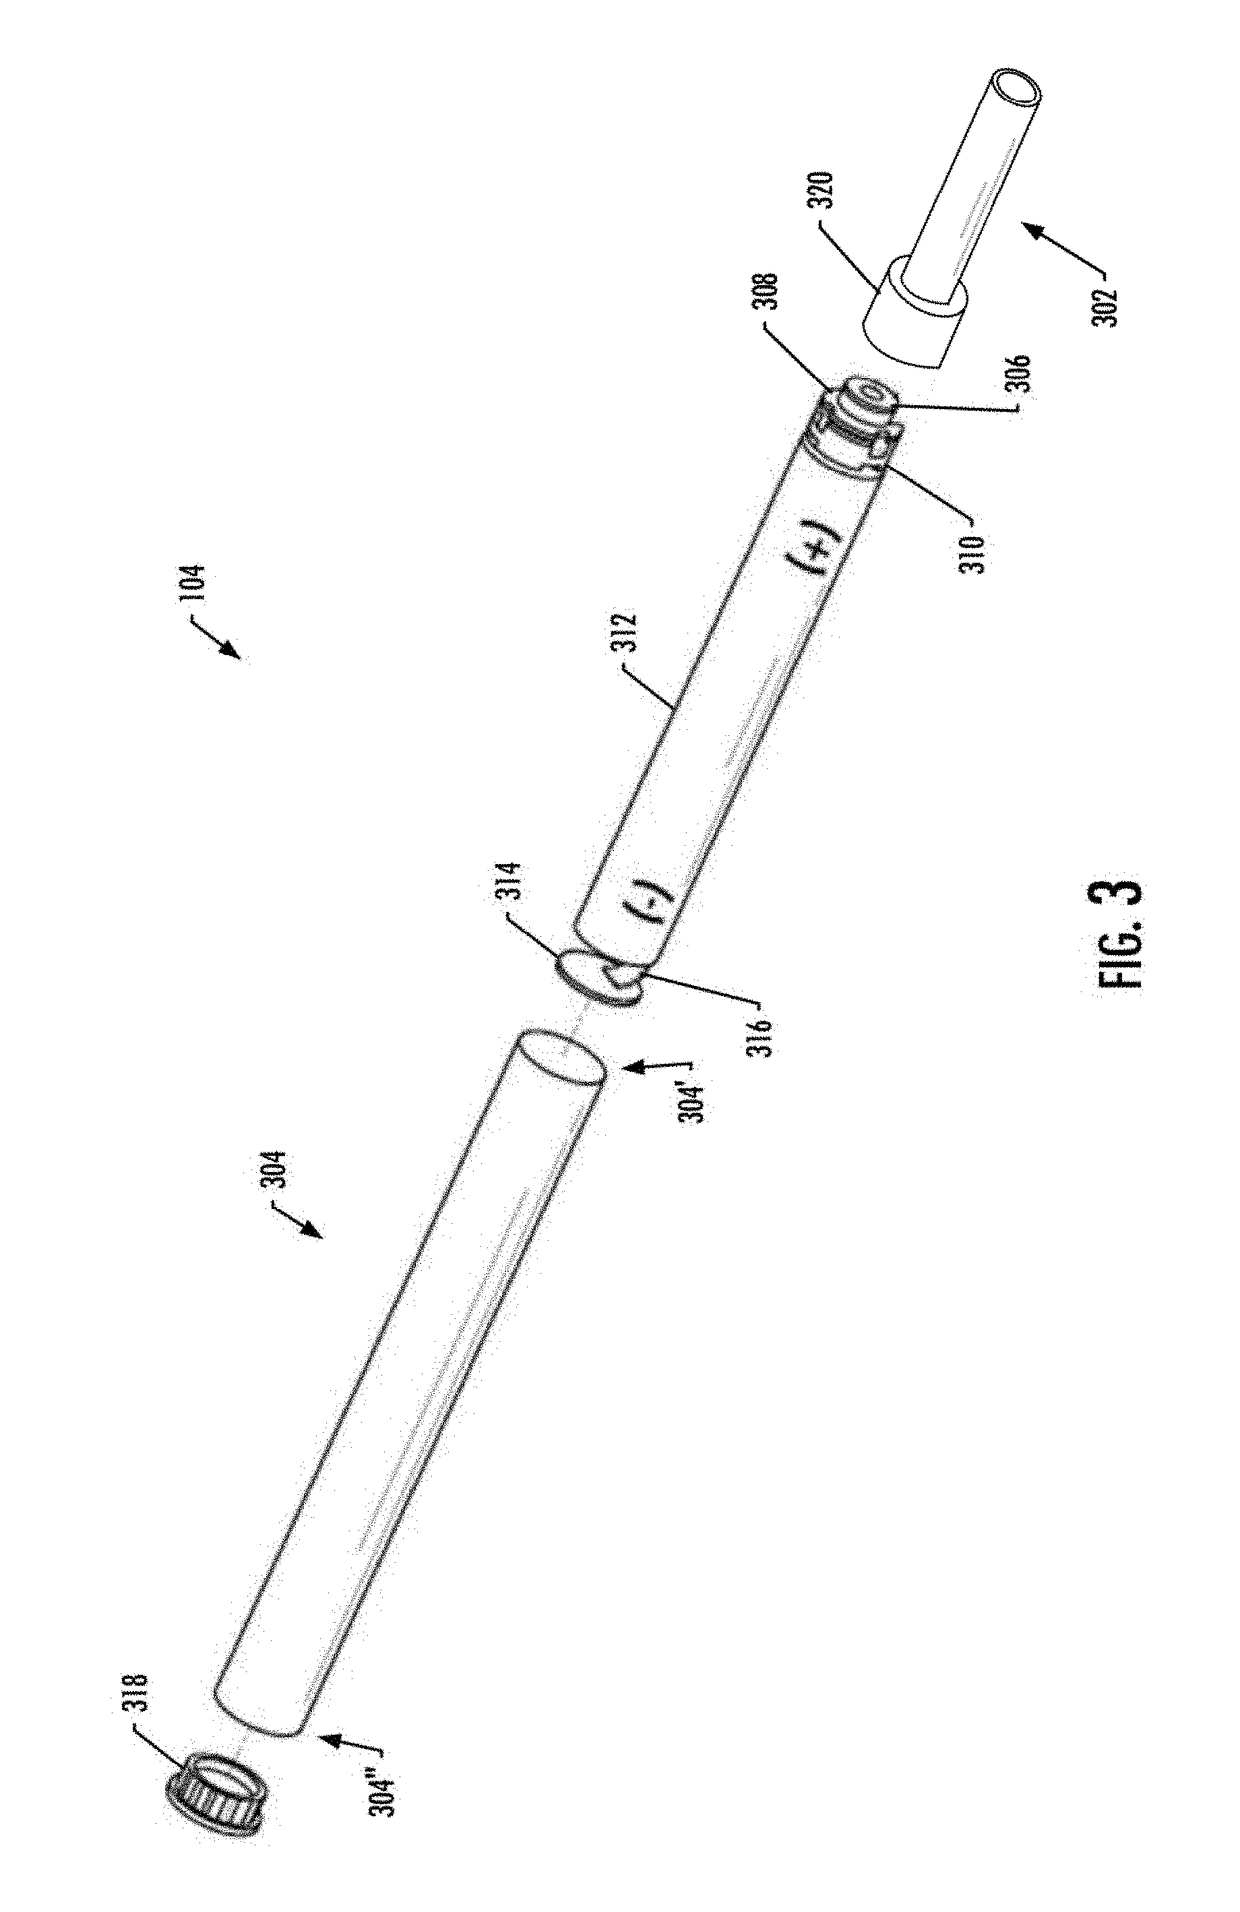 Control for an induction-based aerosol delivery device